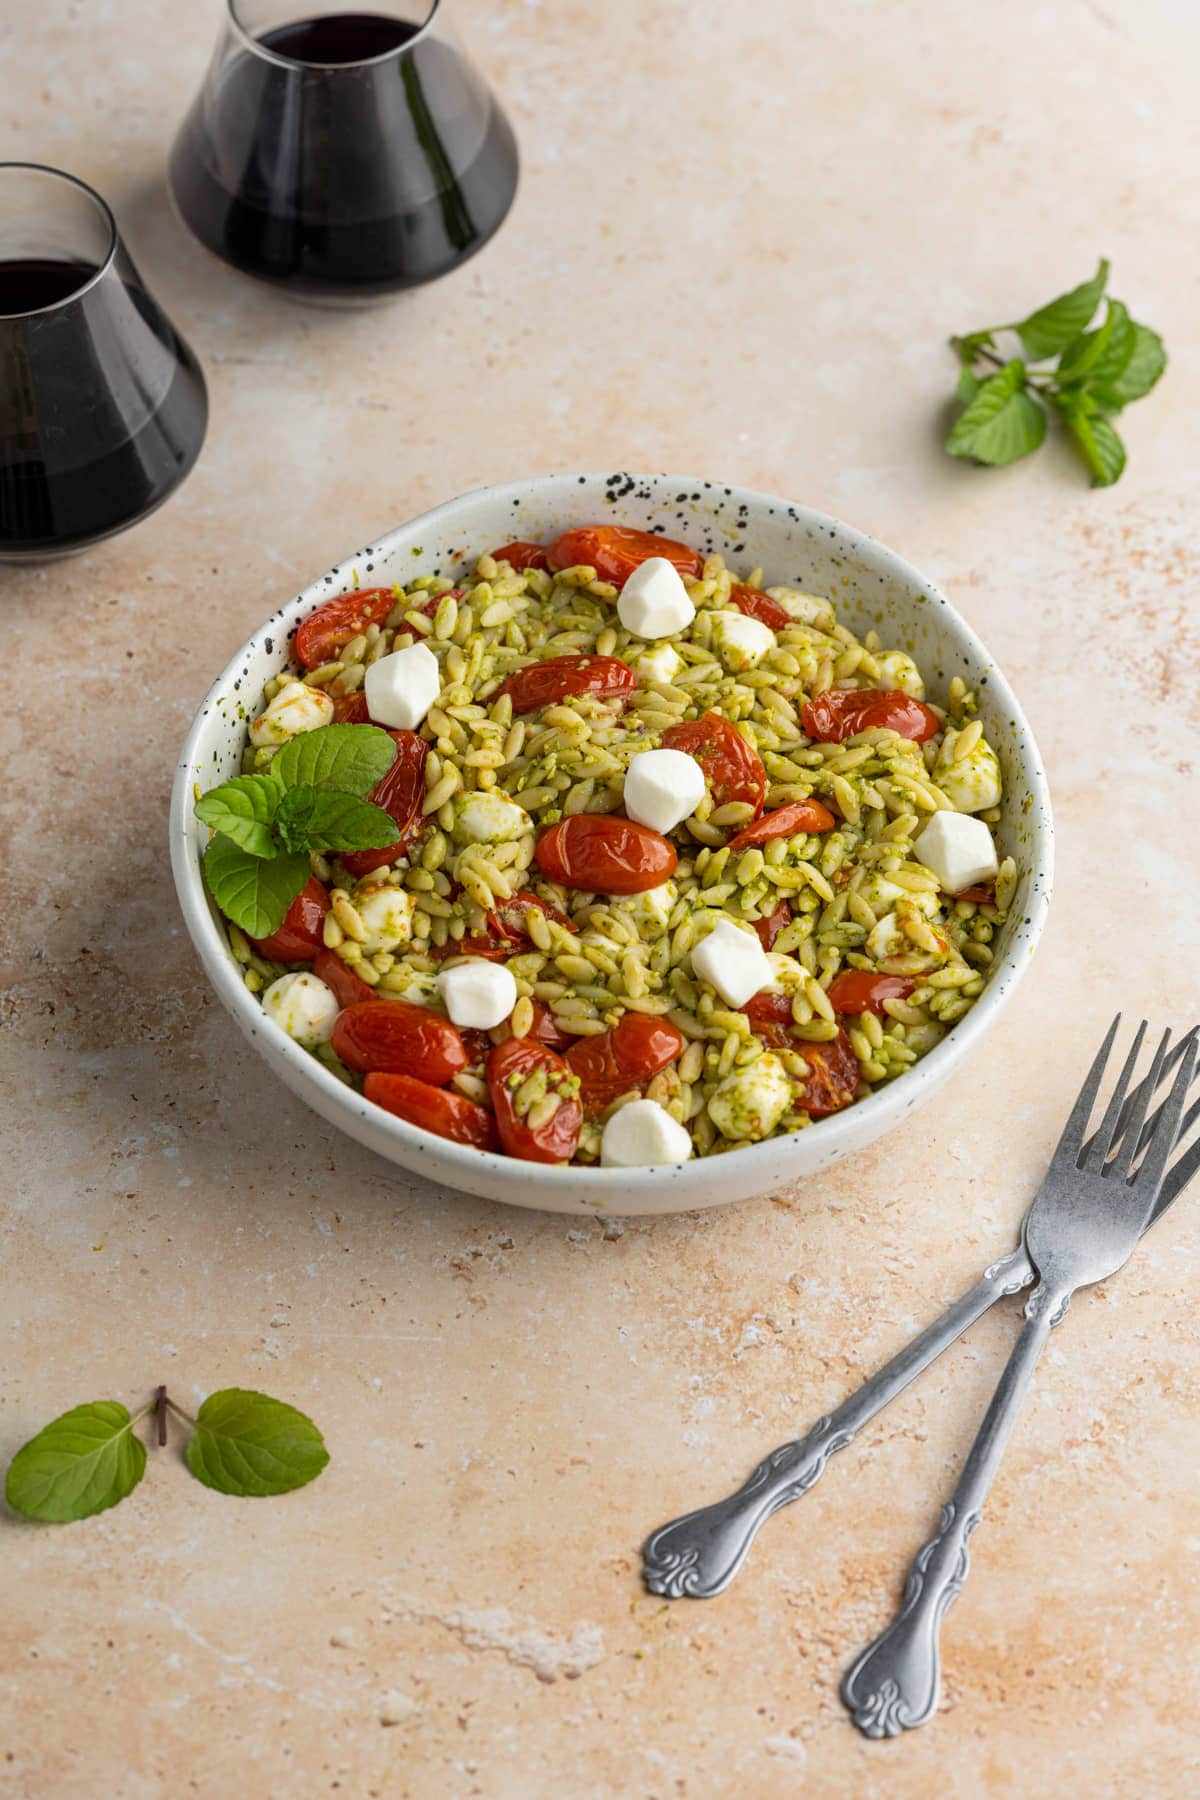 Pesto Orzo Salad served with red wine